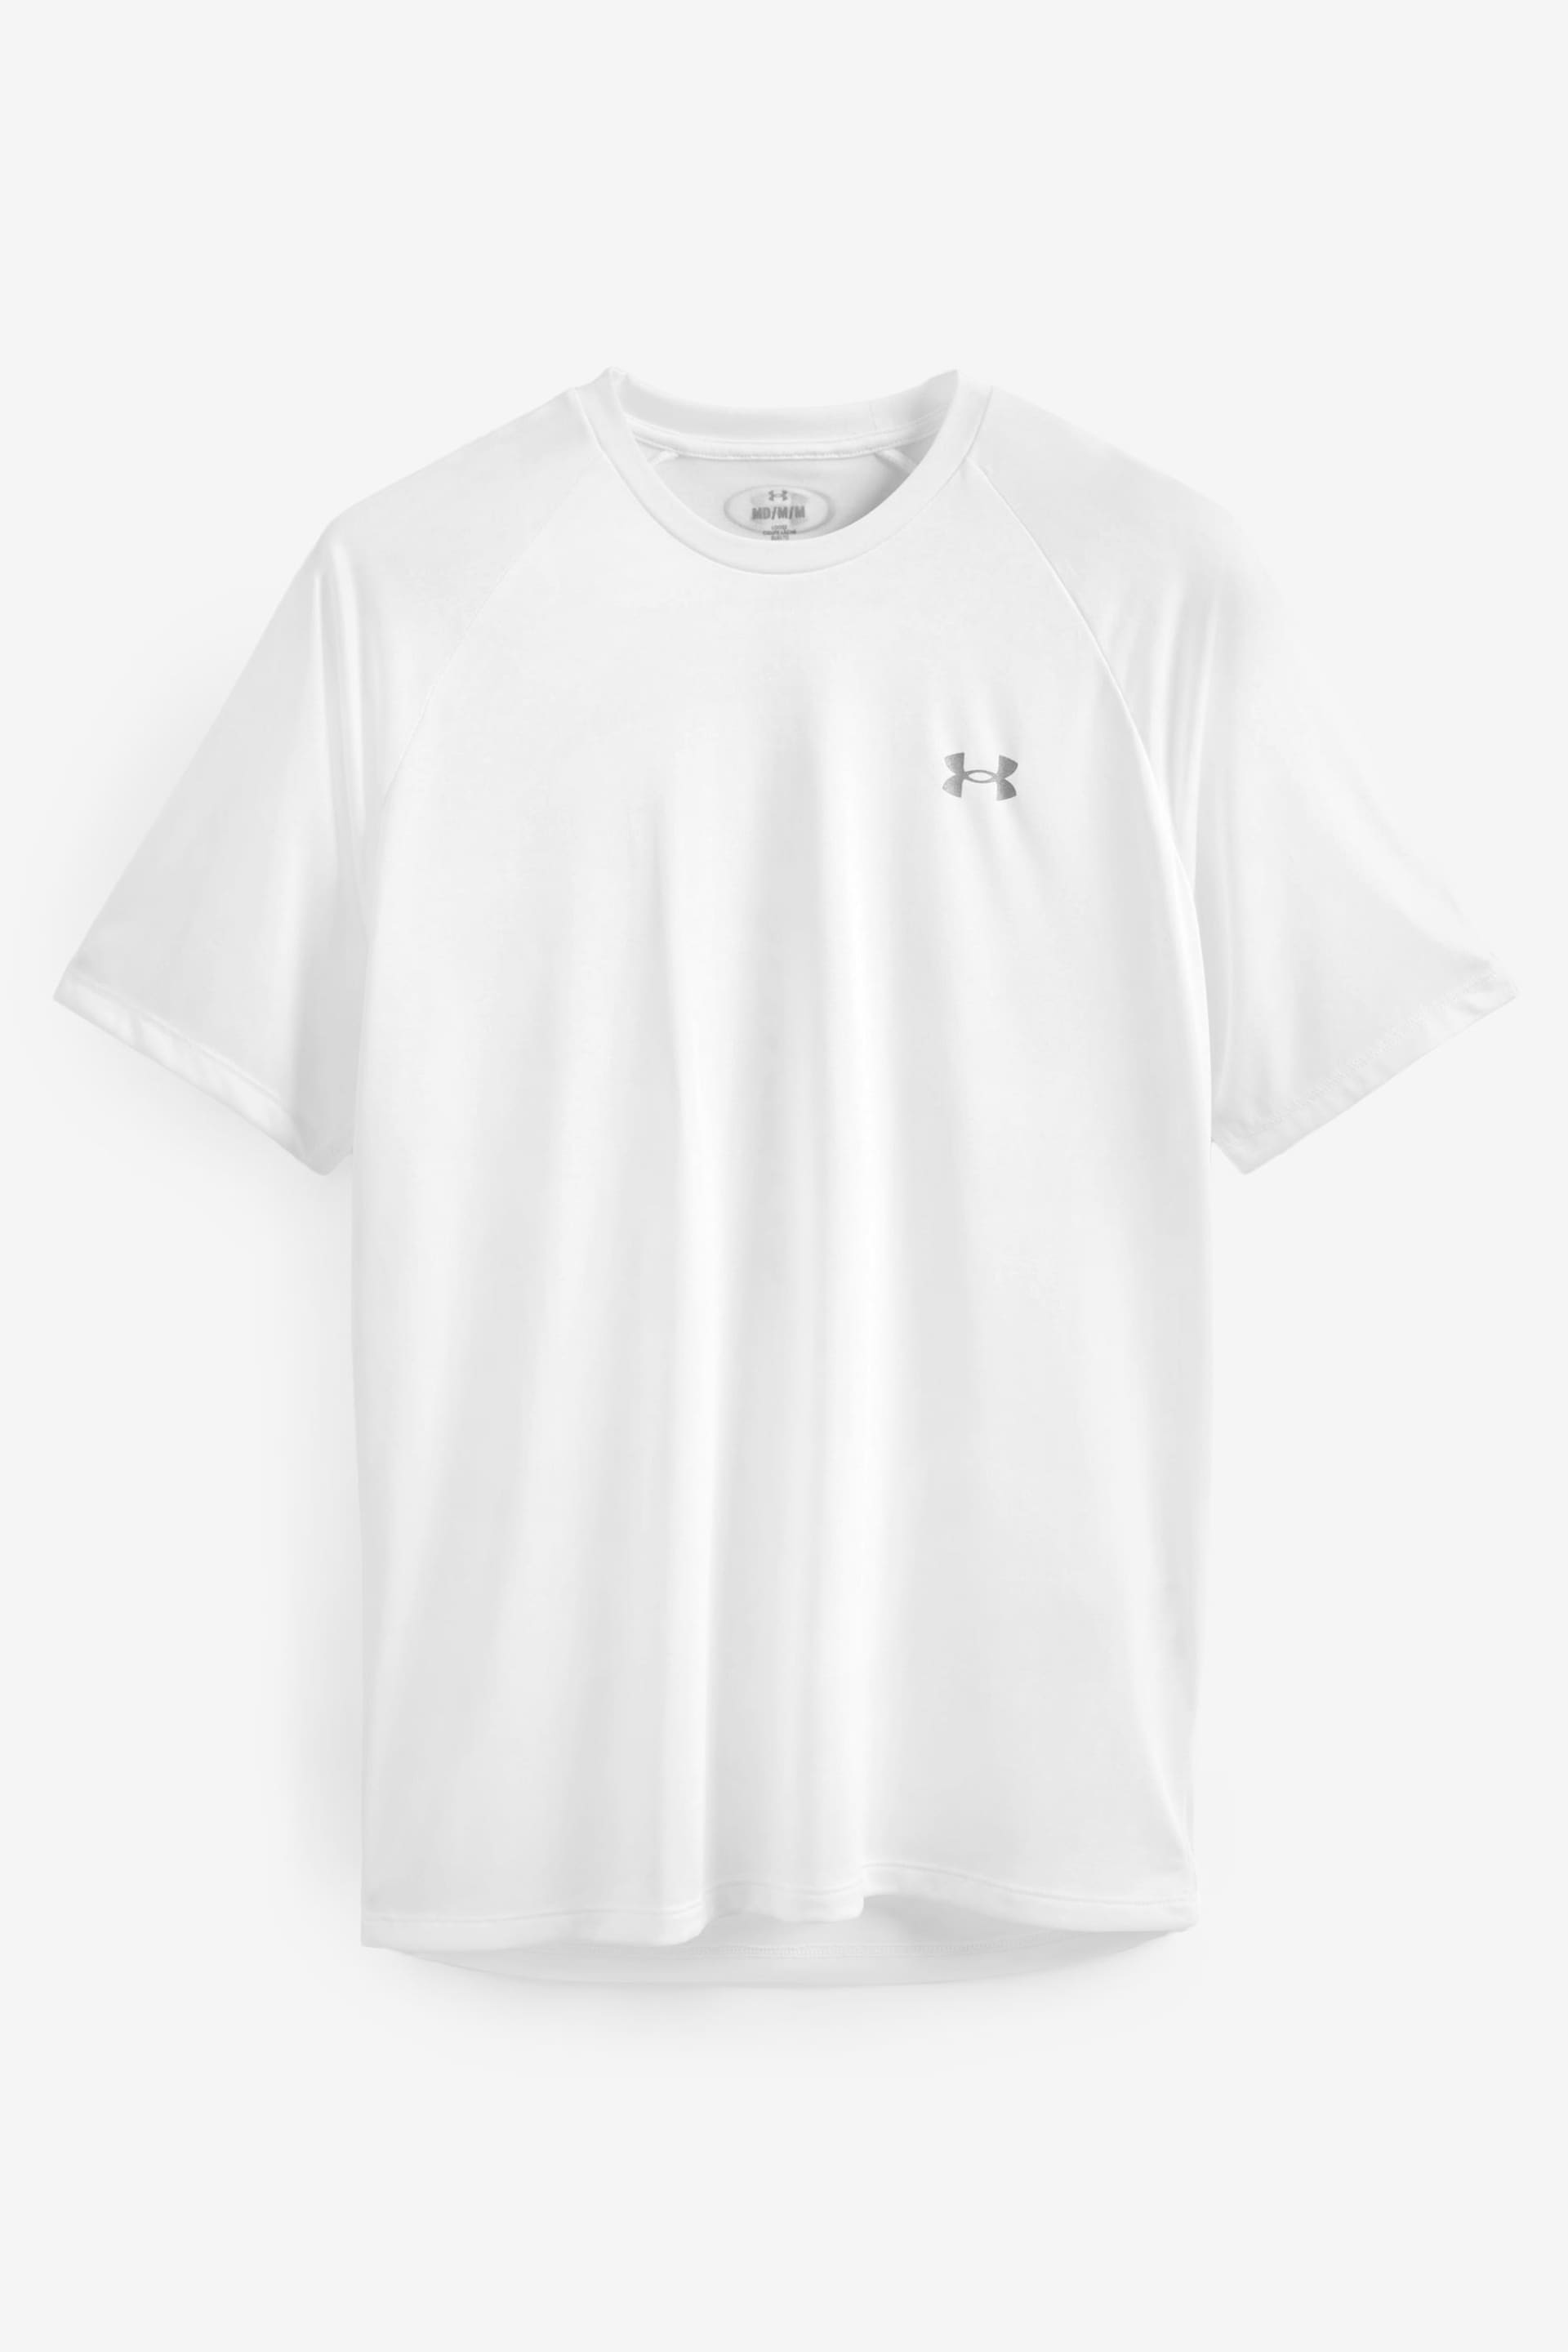 Under Armour Tech Reflective Short Sleeve T-Shirt - Image 7 of 7